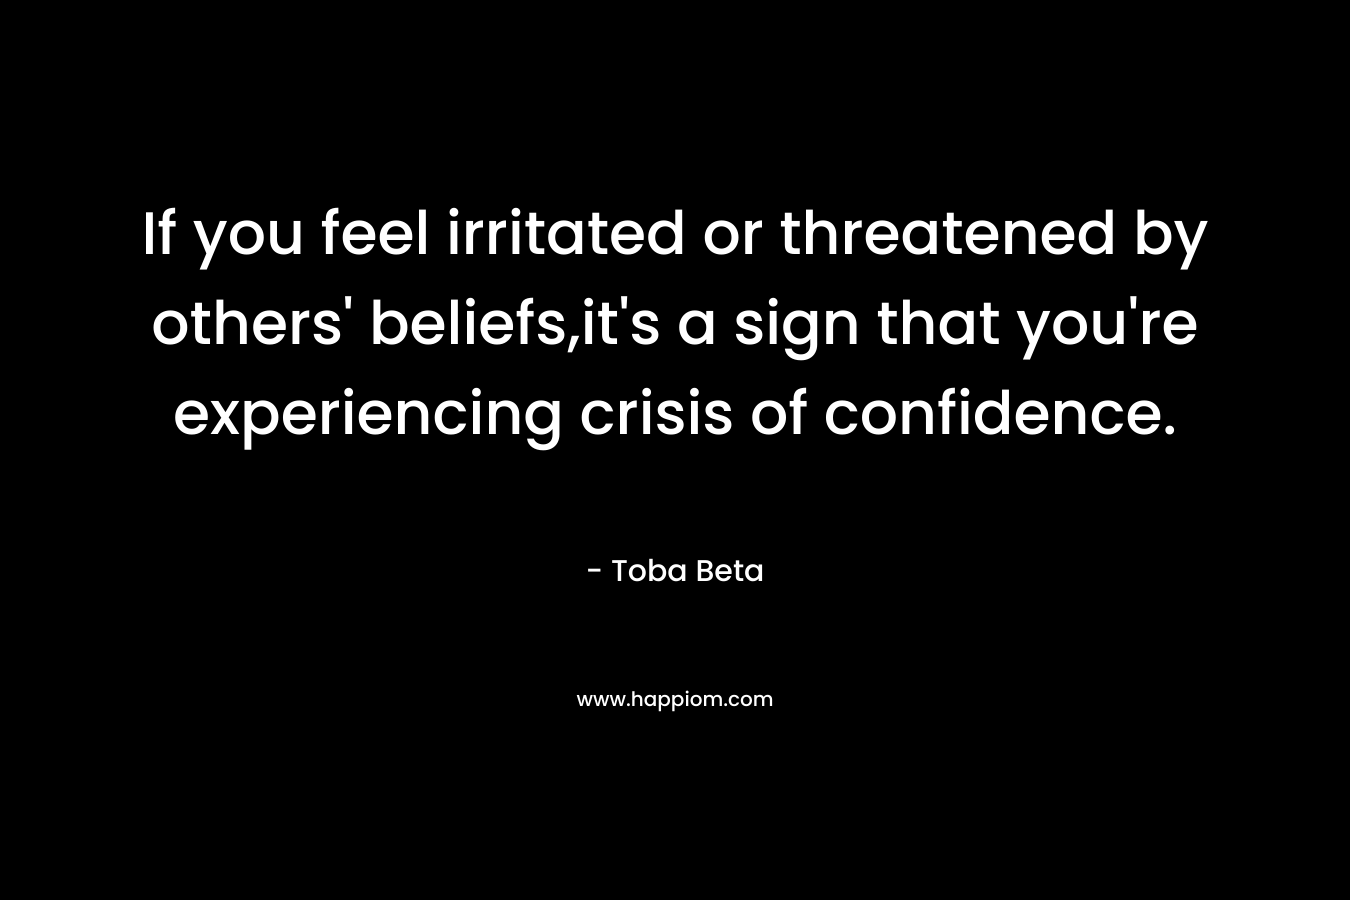 If you feel irritated or threatened by others’ beliefs,it’s a sign that you’re experiencing crisis of confidence. – Toba Beta